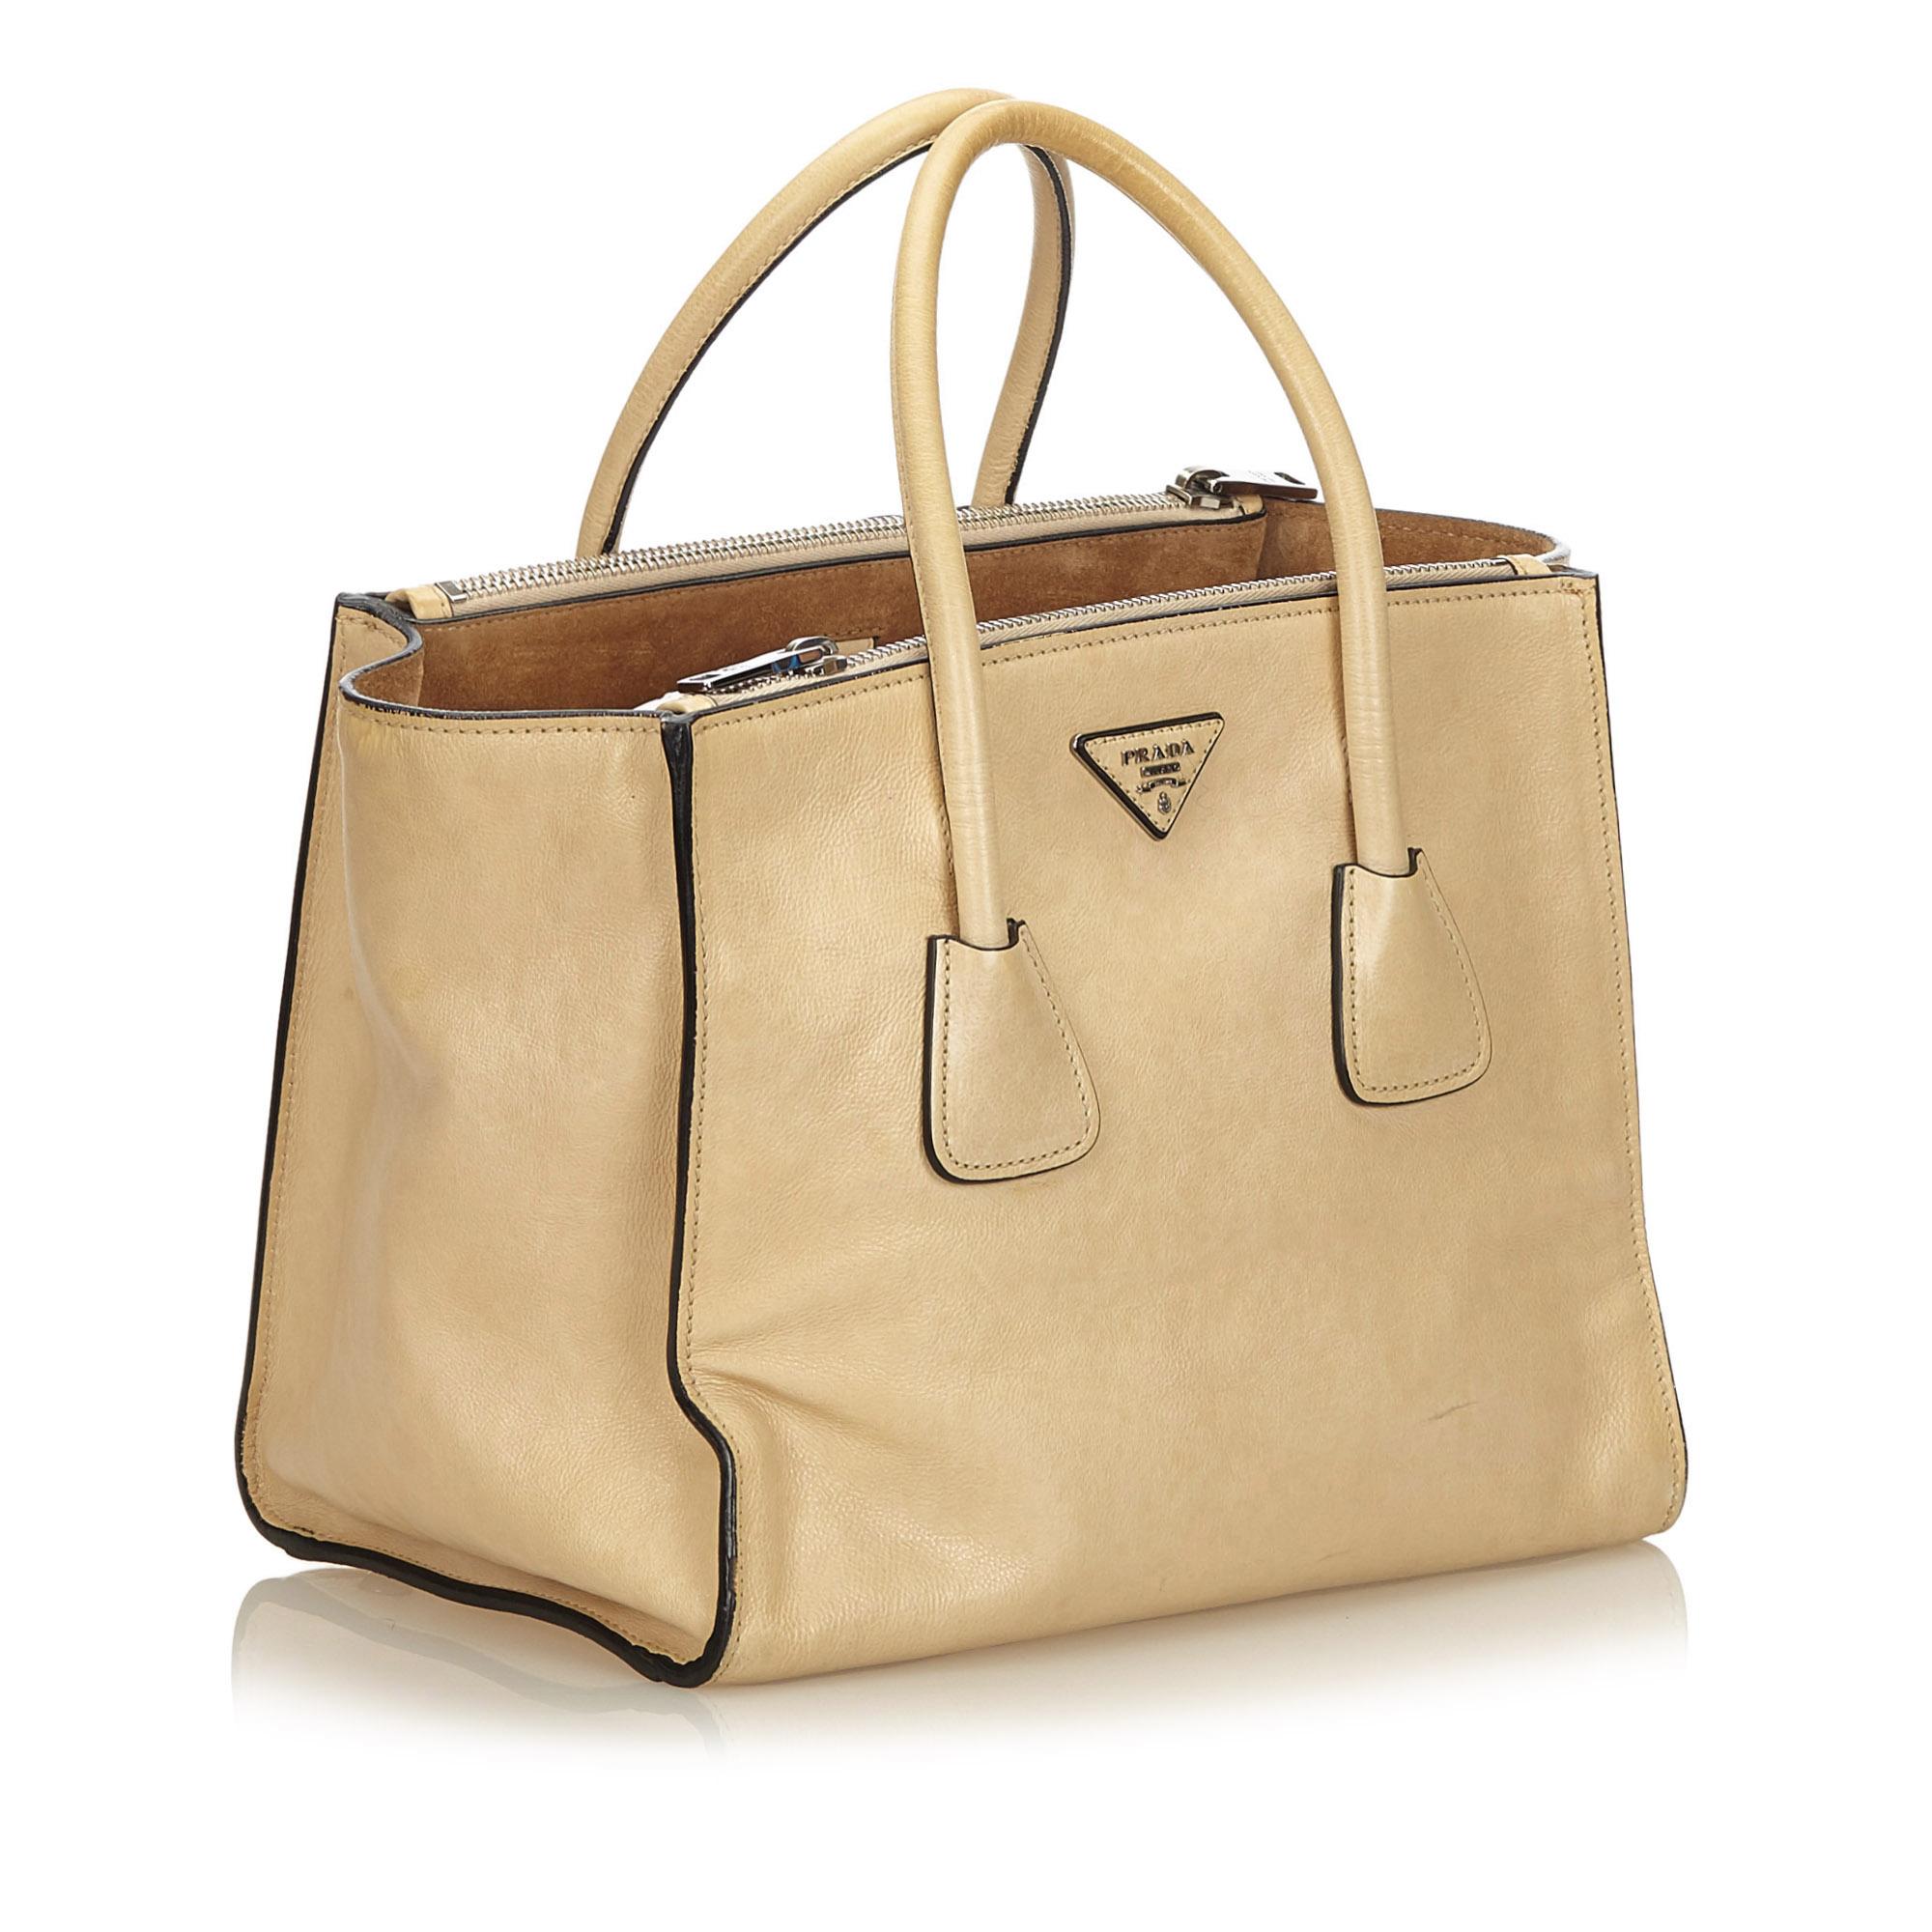 This tote features a calf leather body, rolled handles, open top with magnetic snap button closure, exterior zip compartments, and interior zip pockets.

It carries a B+ condition rating.

Dimensions: 
Length 24.00 cm
Width 28.00 cm
Depth 18.00